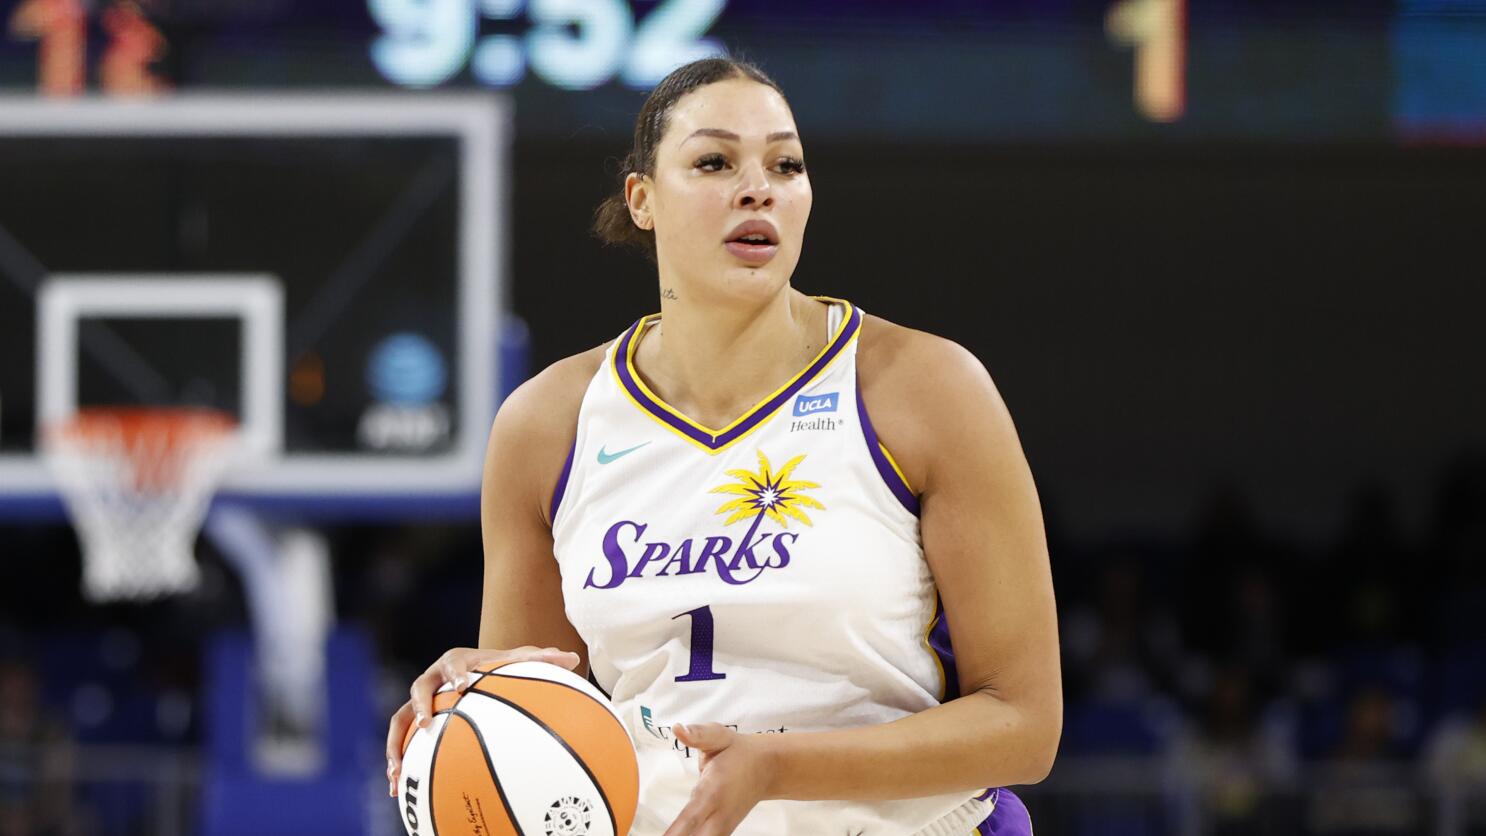 Lakers News: Sparks Agree To Part Ways With Head Coach & General